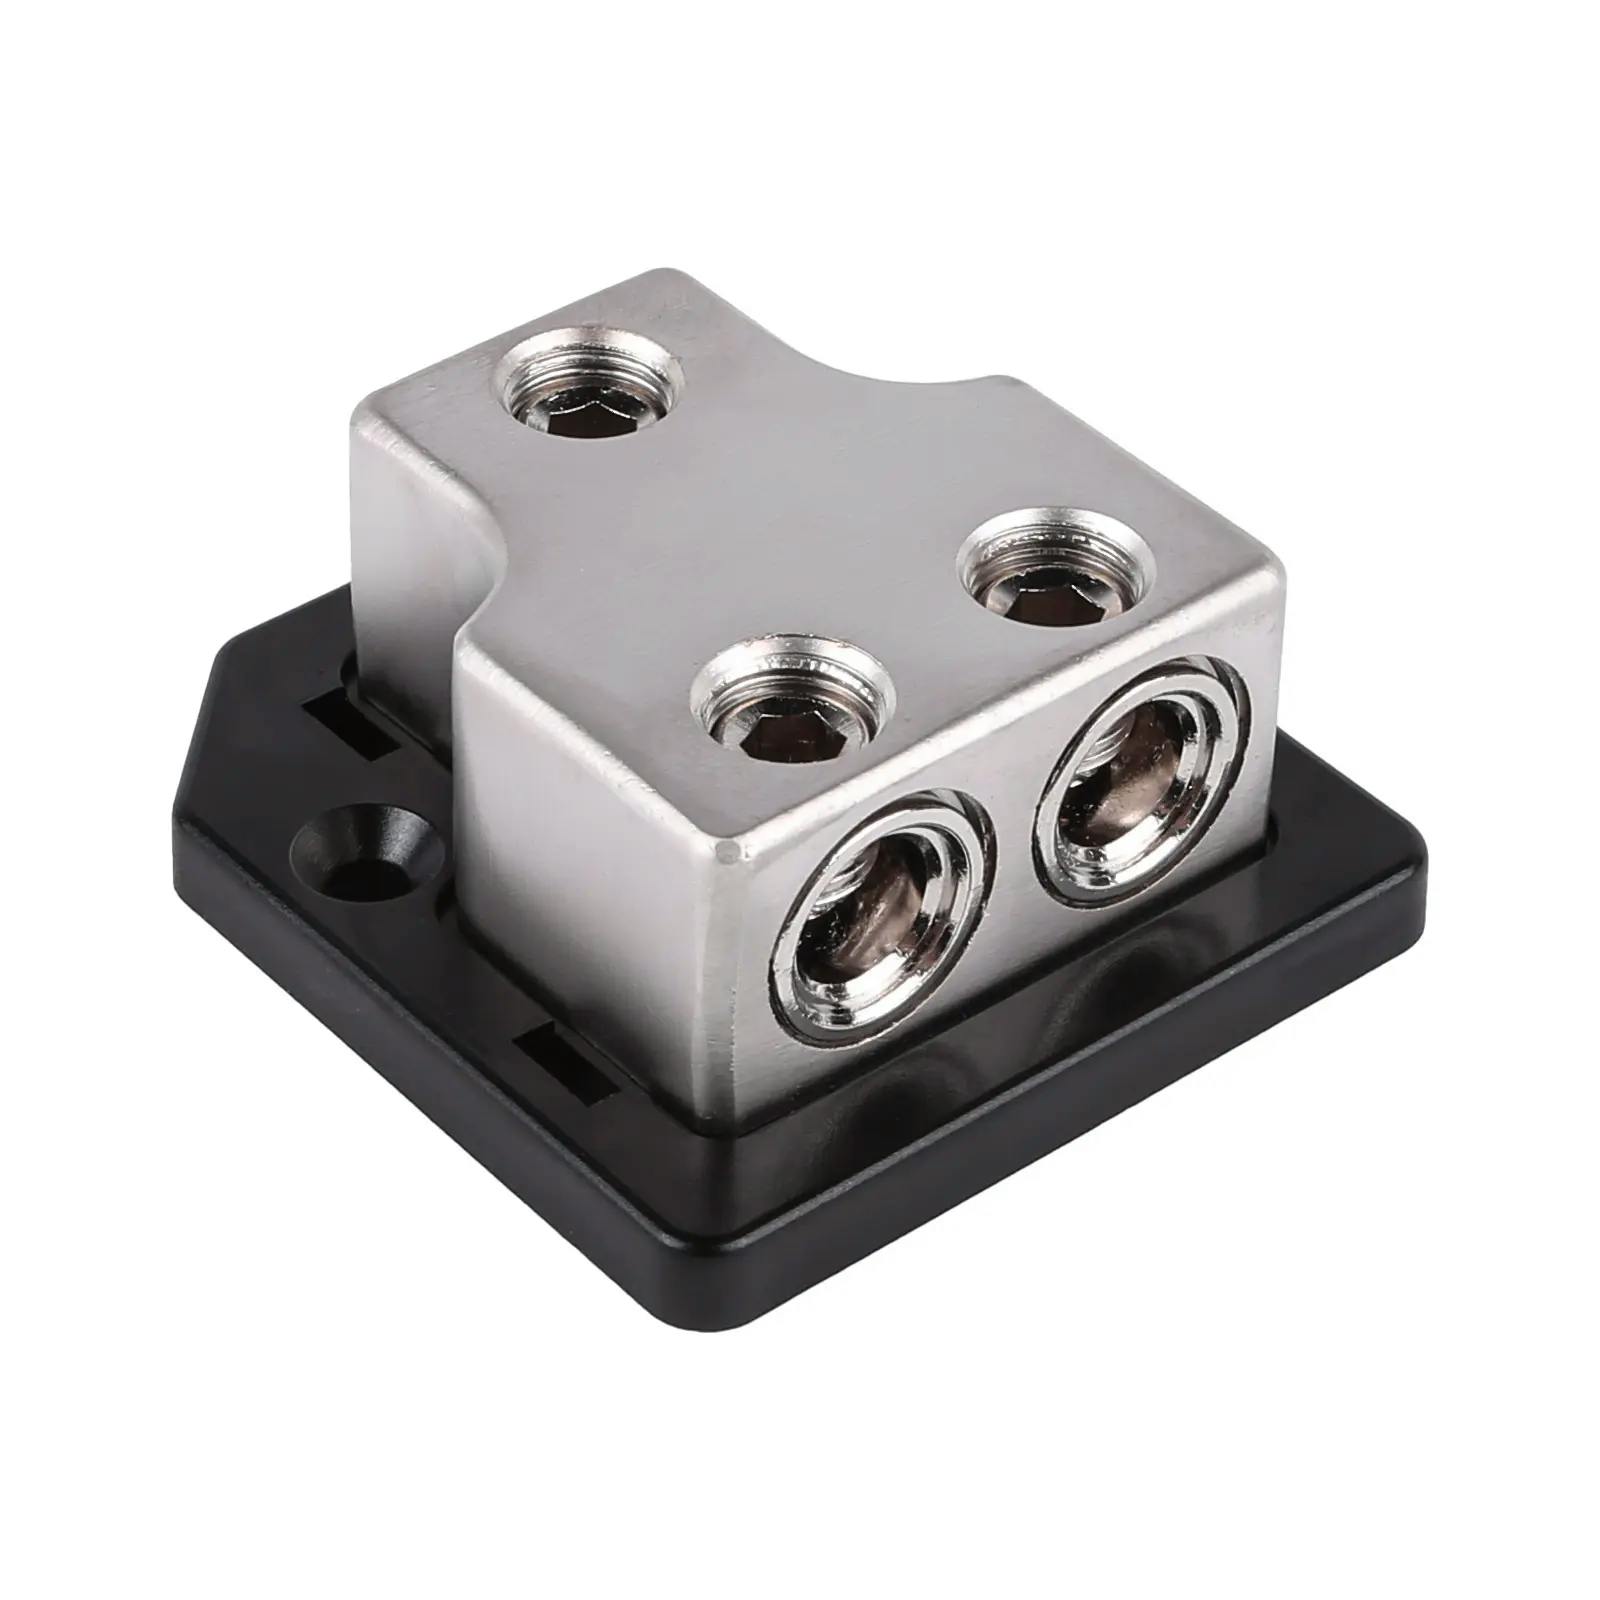 Featured Product Photo for SK-DIST-BLK6 | Single 0/4 Gauge to Dual 0/4 Gauge Power Distribution Block